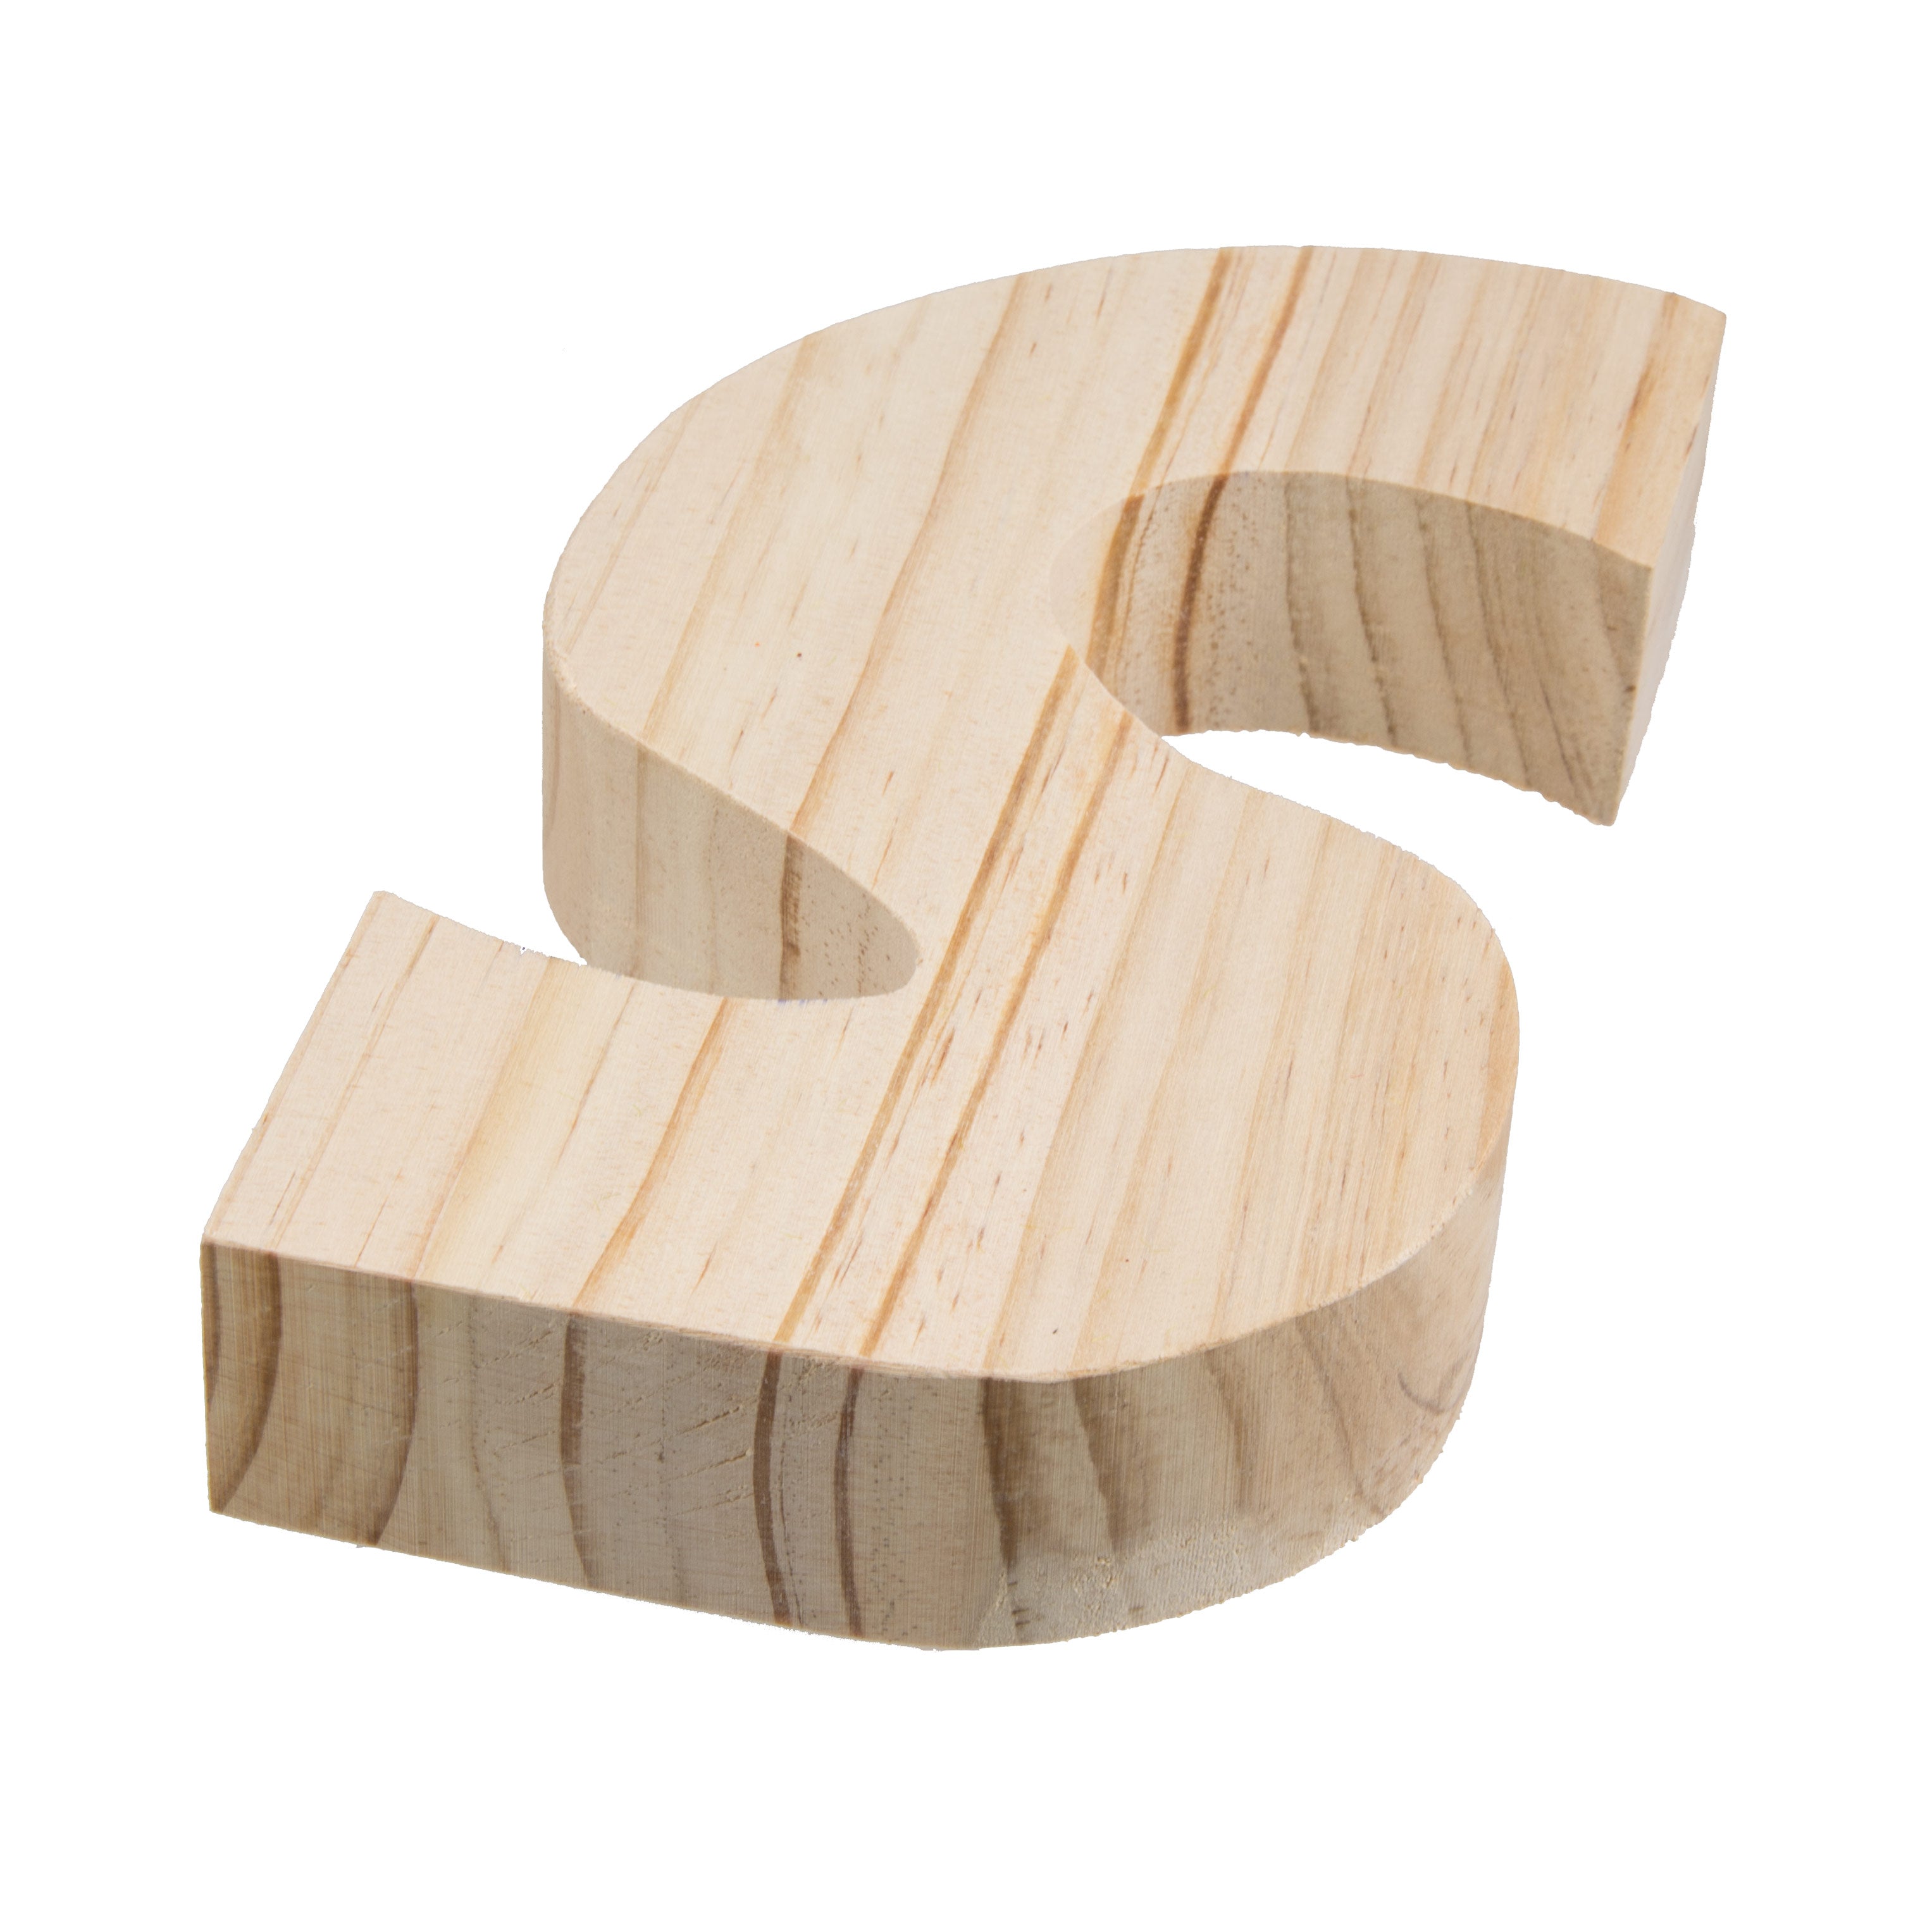 7.75" Chunky Wooden Letter: S